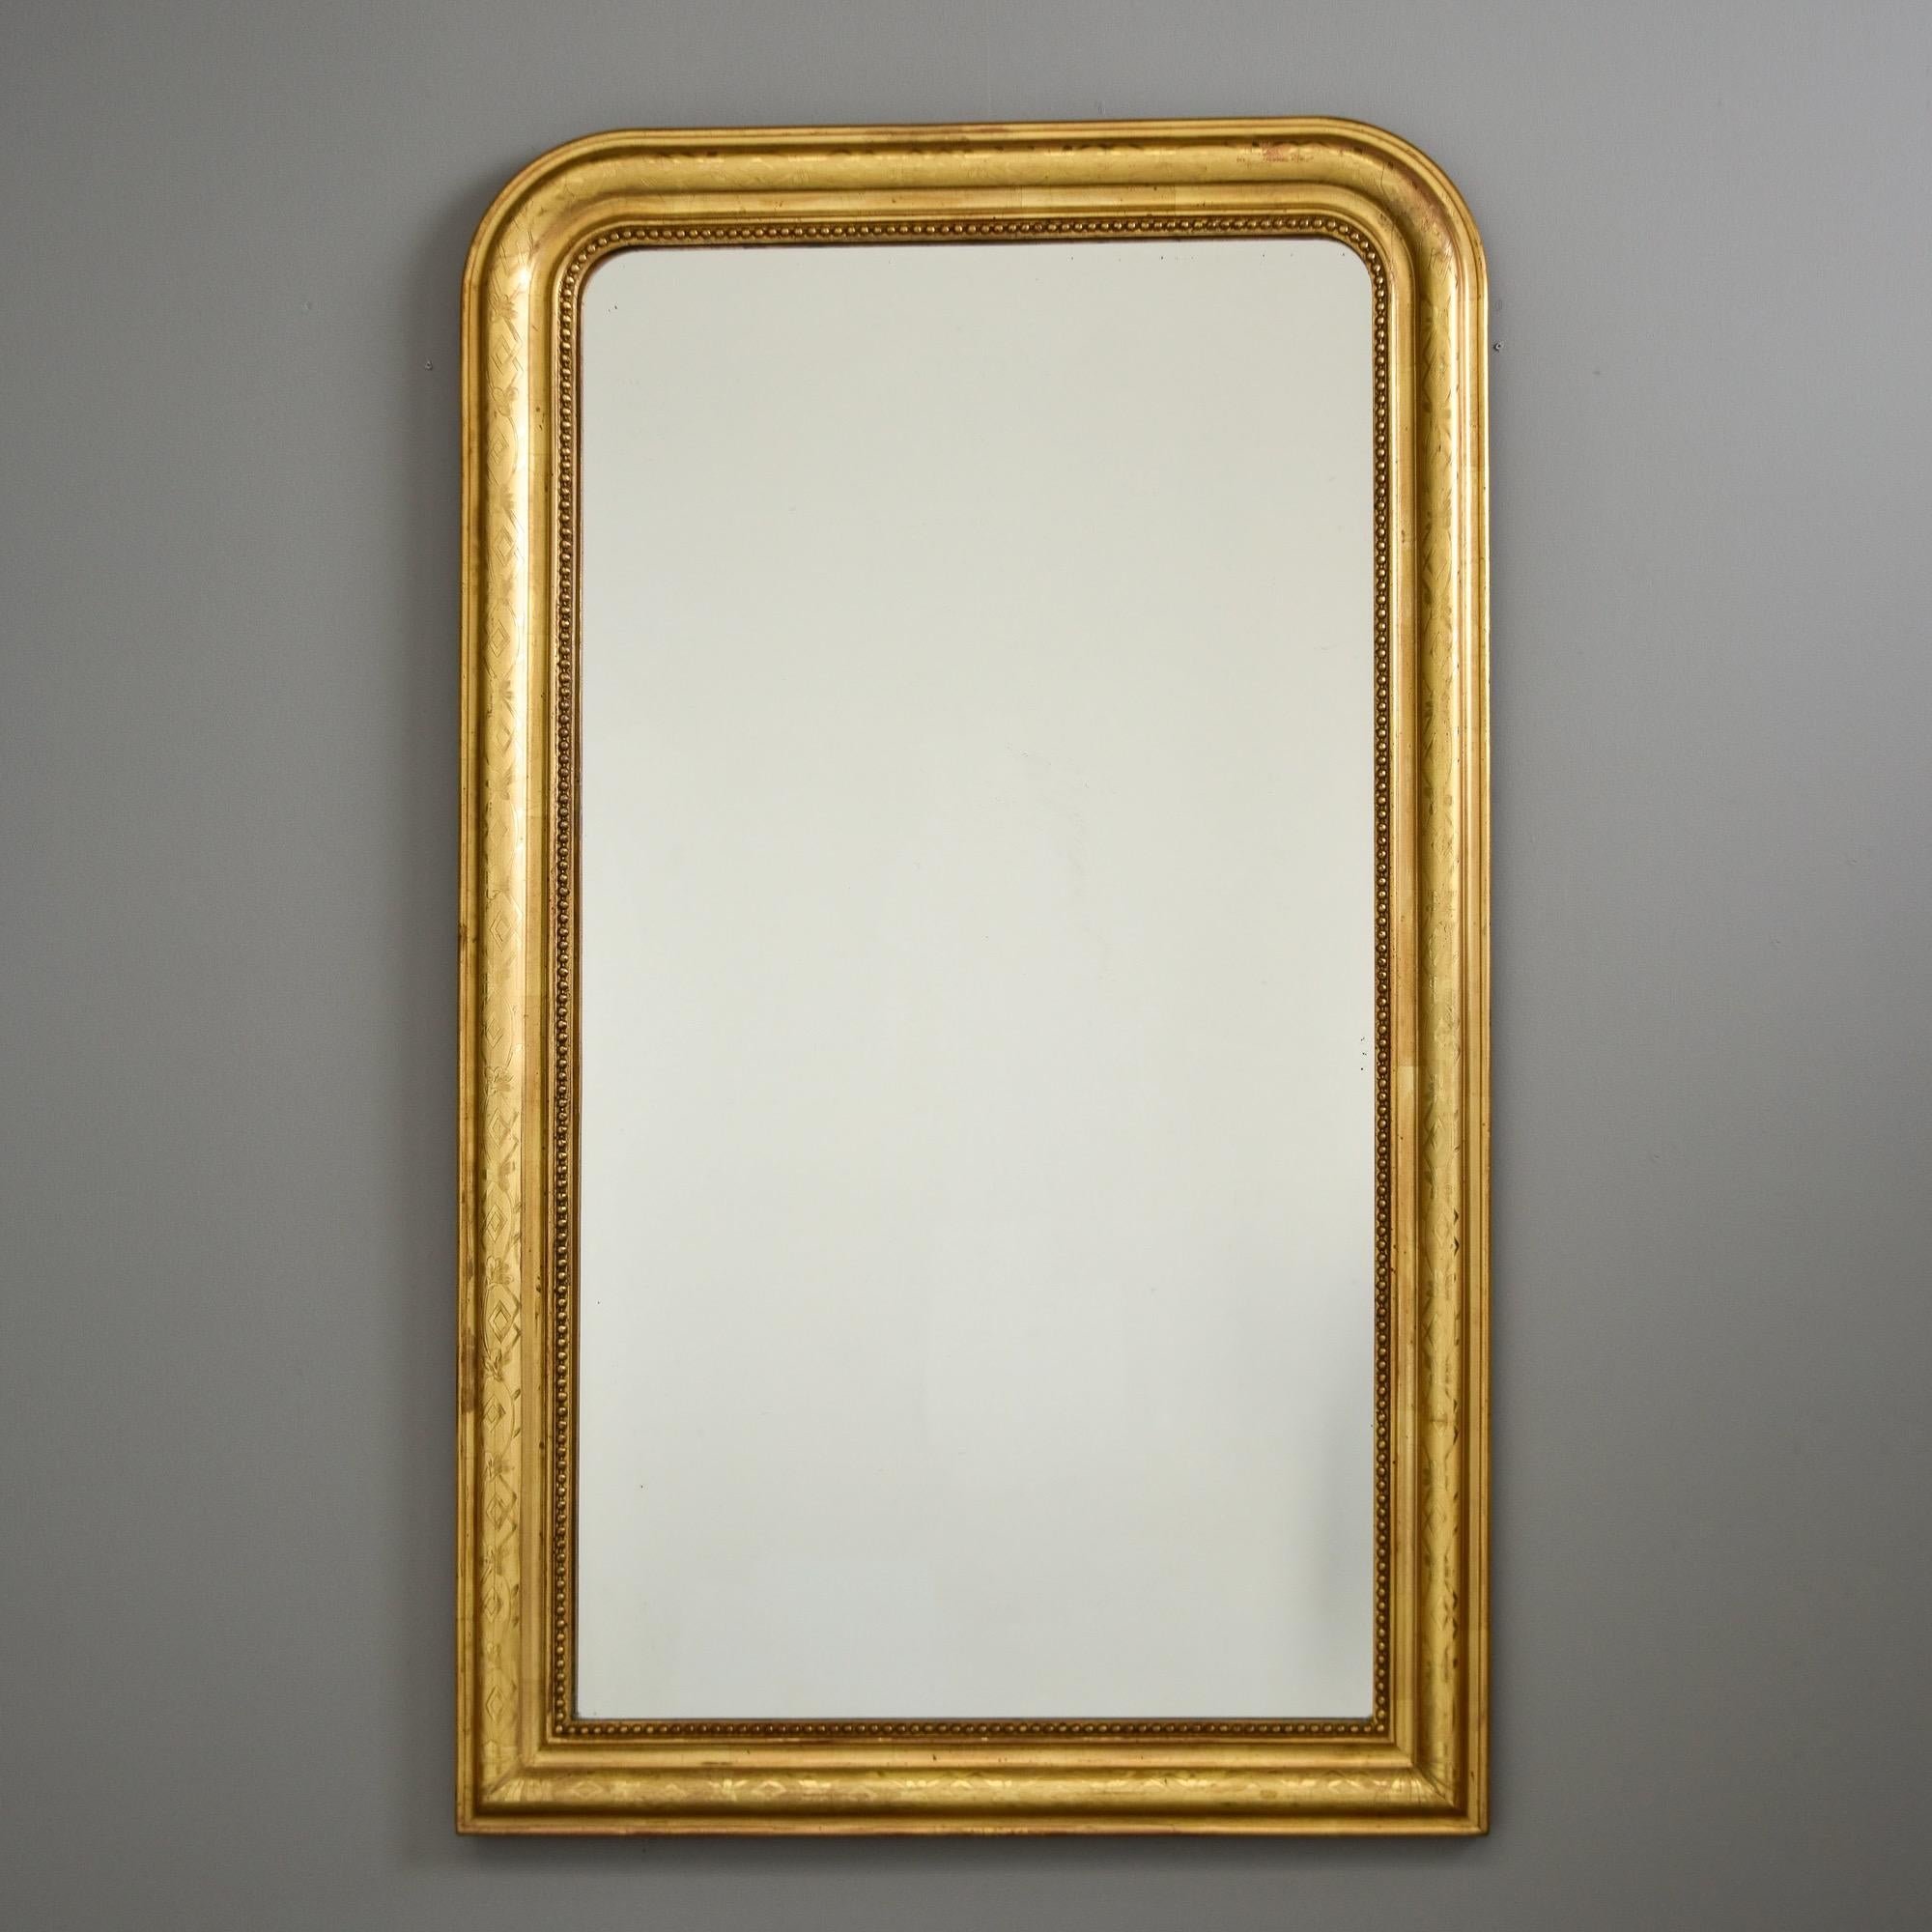 Found in France, this giltwood framed Louis Philippe mirror dates from the 1870s. Mirror has been recently replaced - we acquired this piece as shown from a French dealer. Subtle etched design all around frame of open diamond pattern with irises,